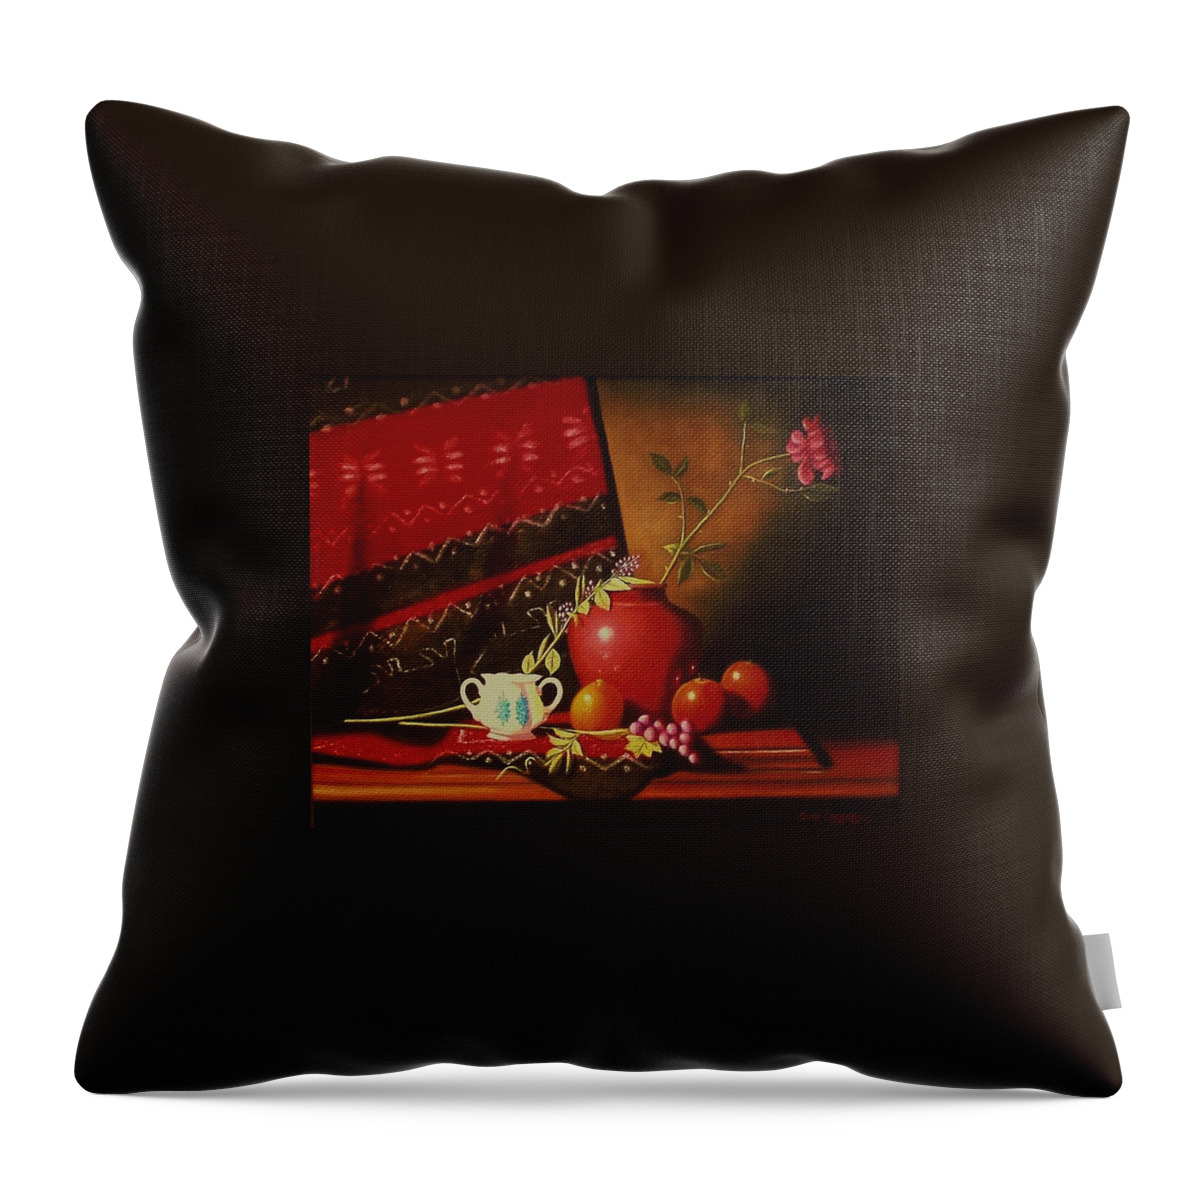 Stilllife Throw Pillow featuring the painting Still life with red vase. by Gene Gregory